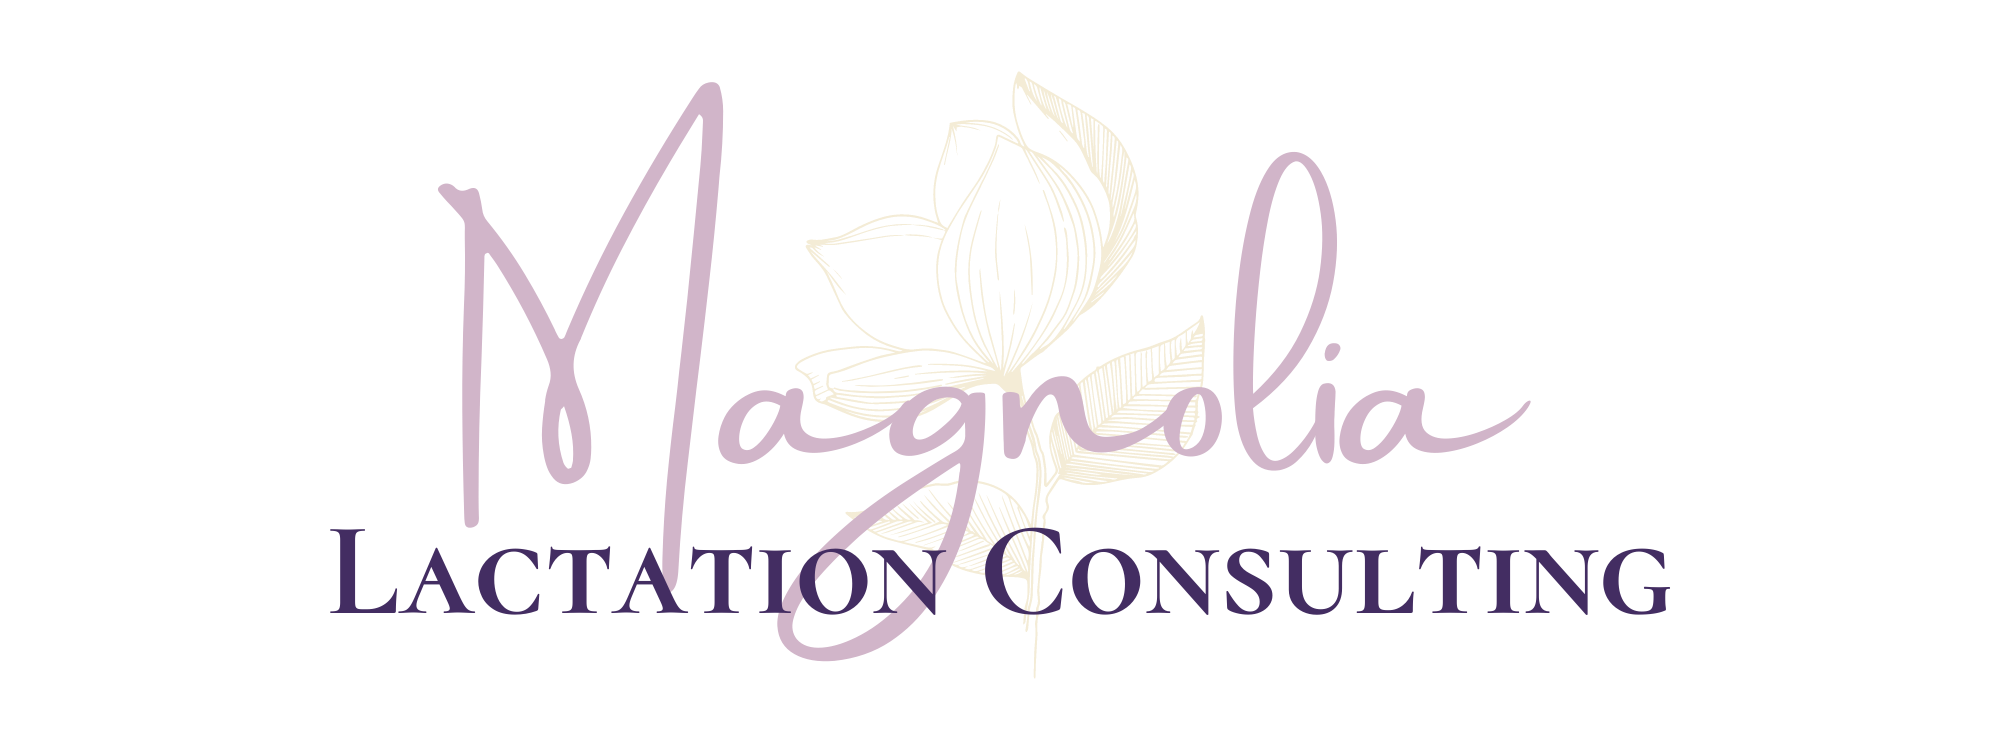 Magnolia Lactation Consulting_3.png